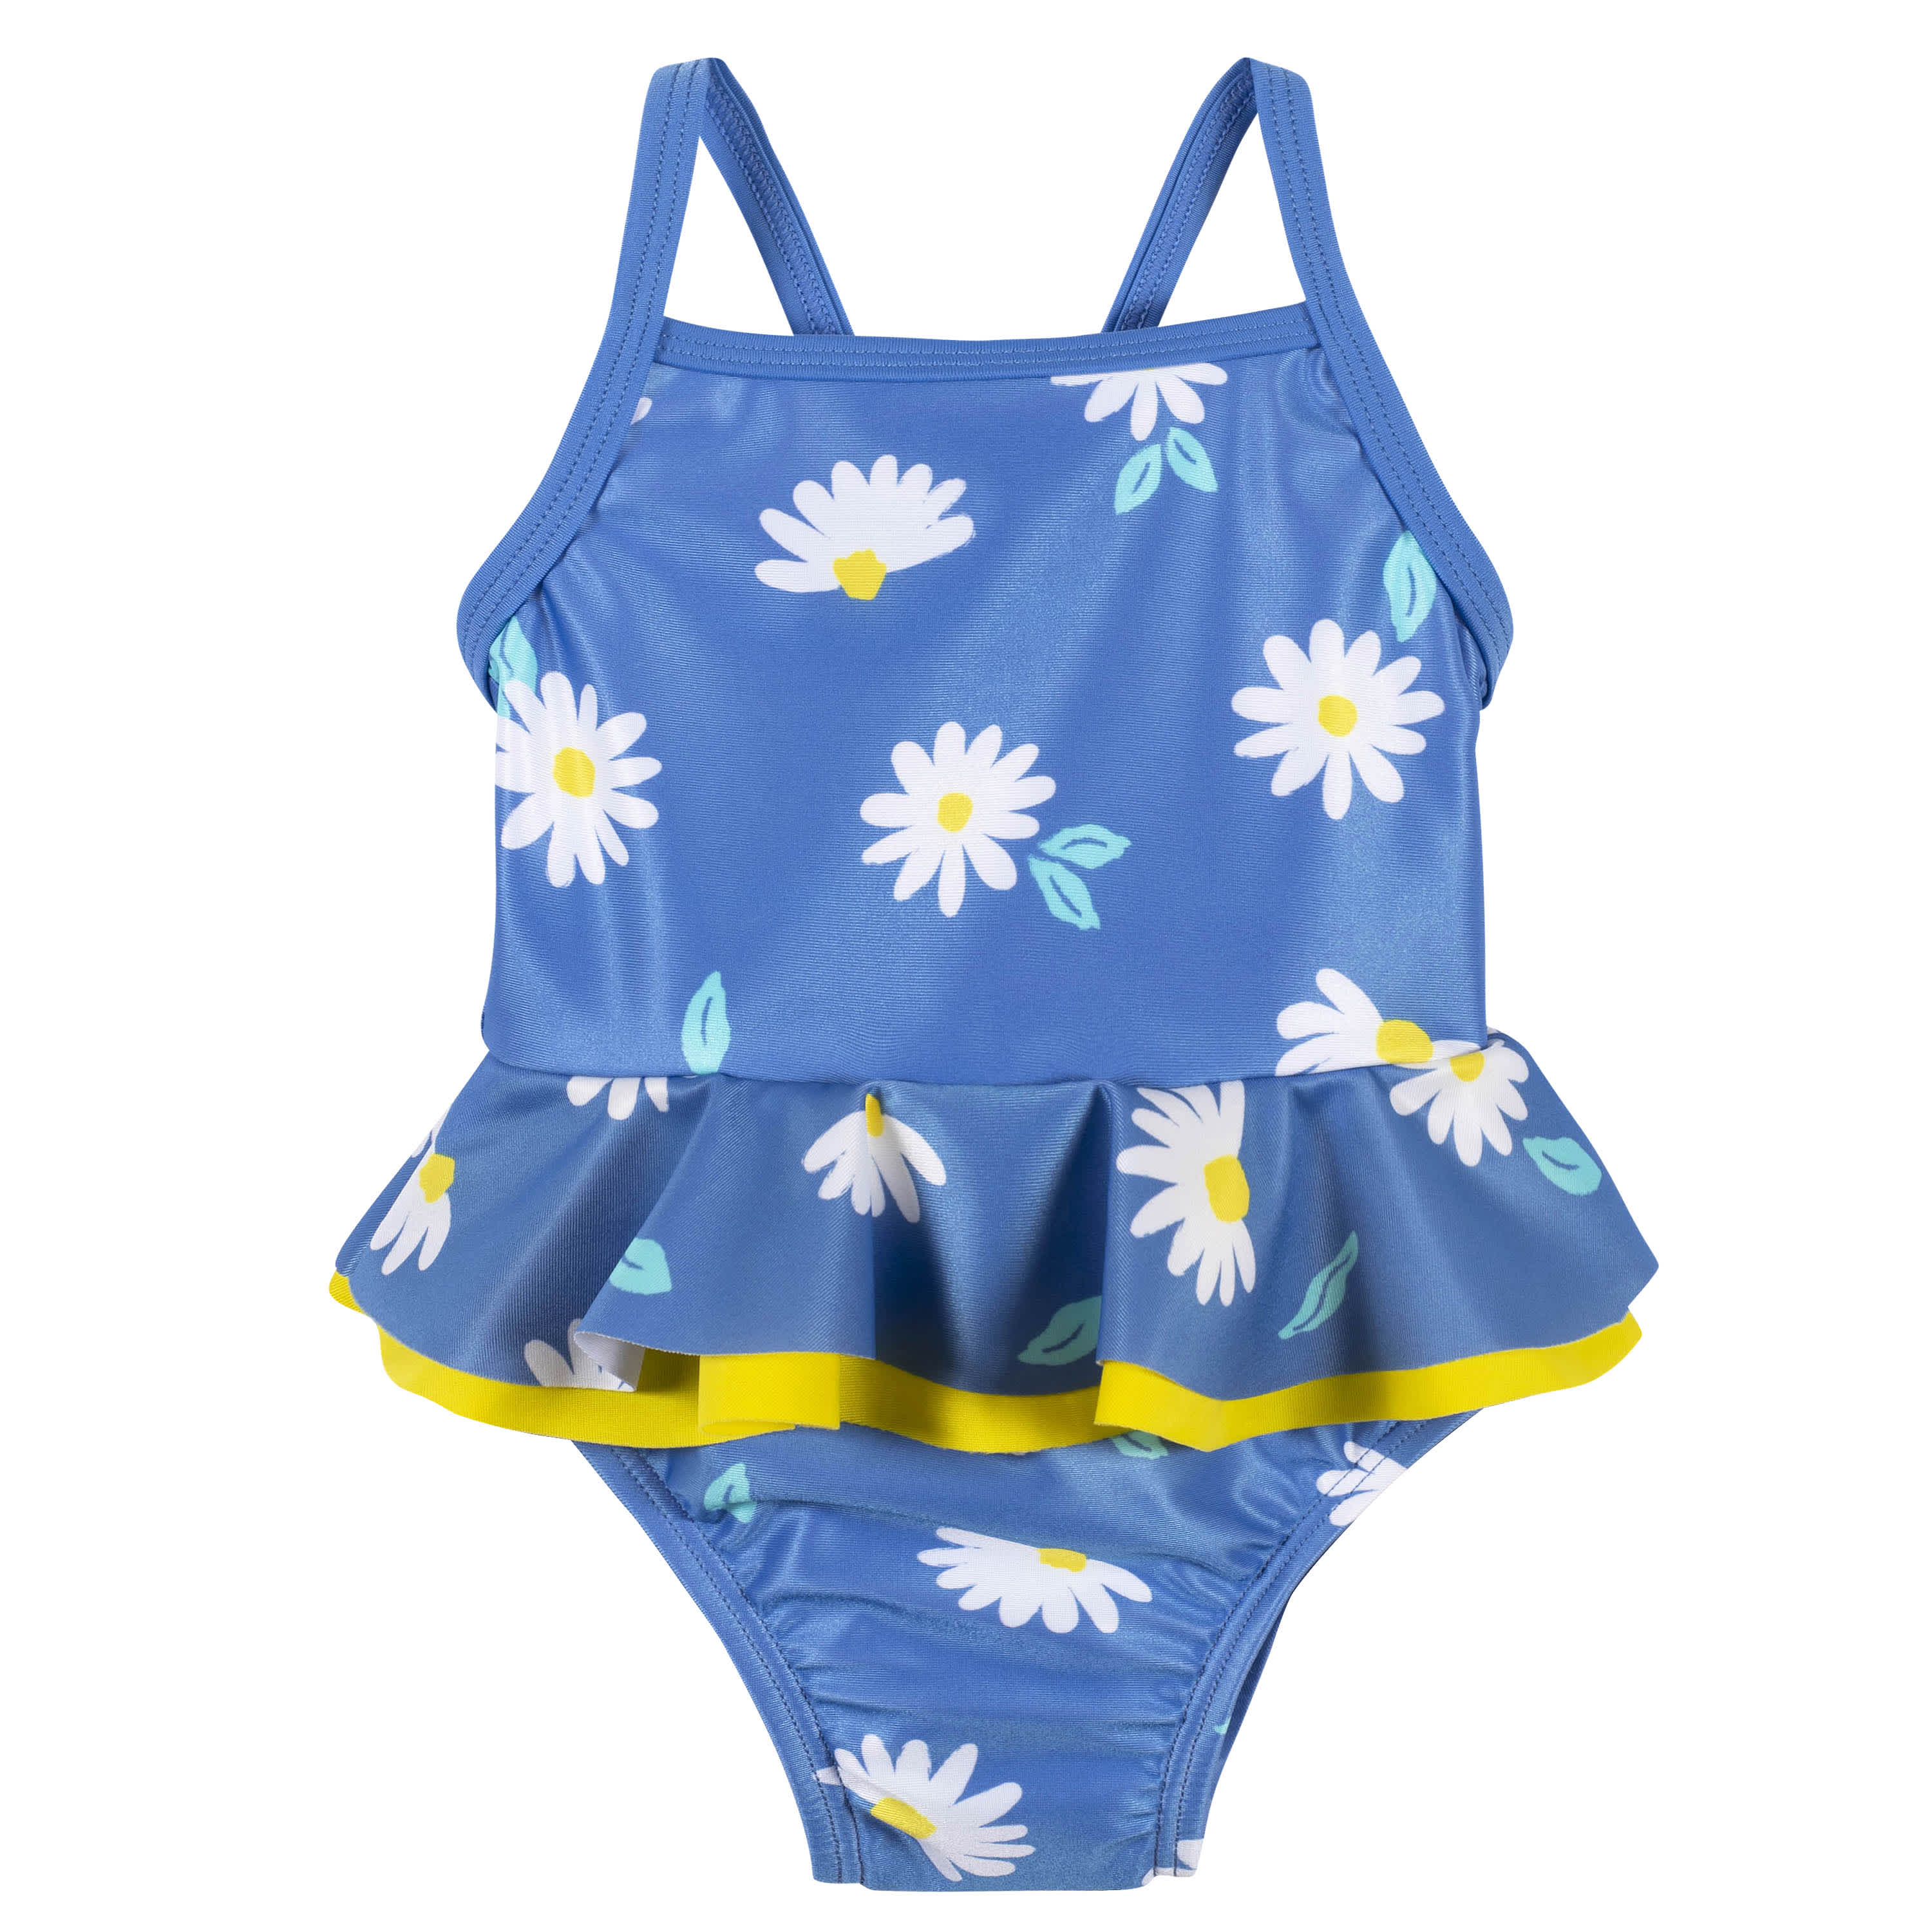 jovati Toddler Girls Kids Swimsuit Small Daisies Print Long Sleeves Hollow  Out Child One-piece Swimsuit 